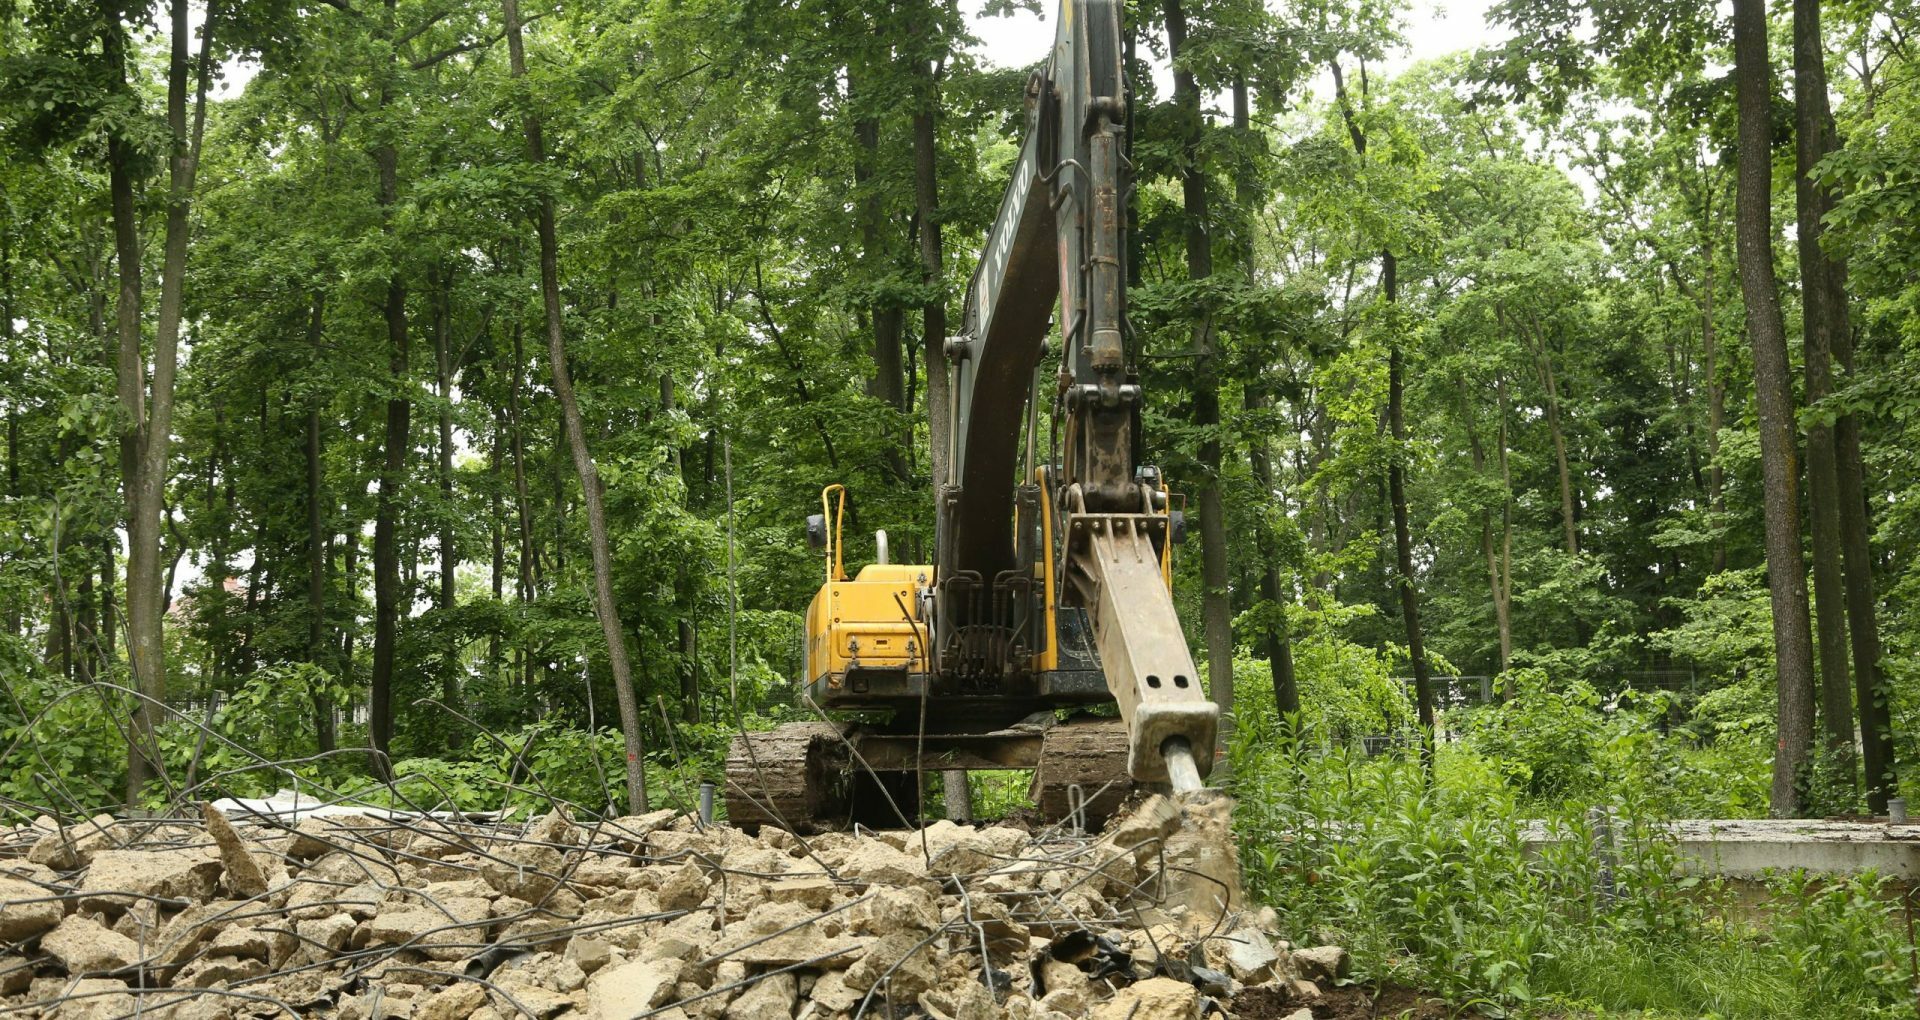 The Concrete Constructions Built in the Durlești Forest are Demolished after a ZdG Investigation